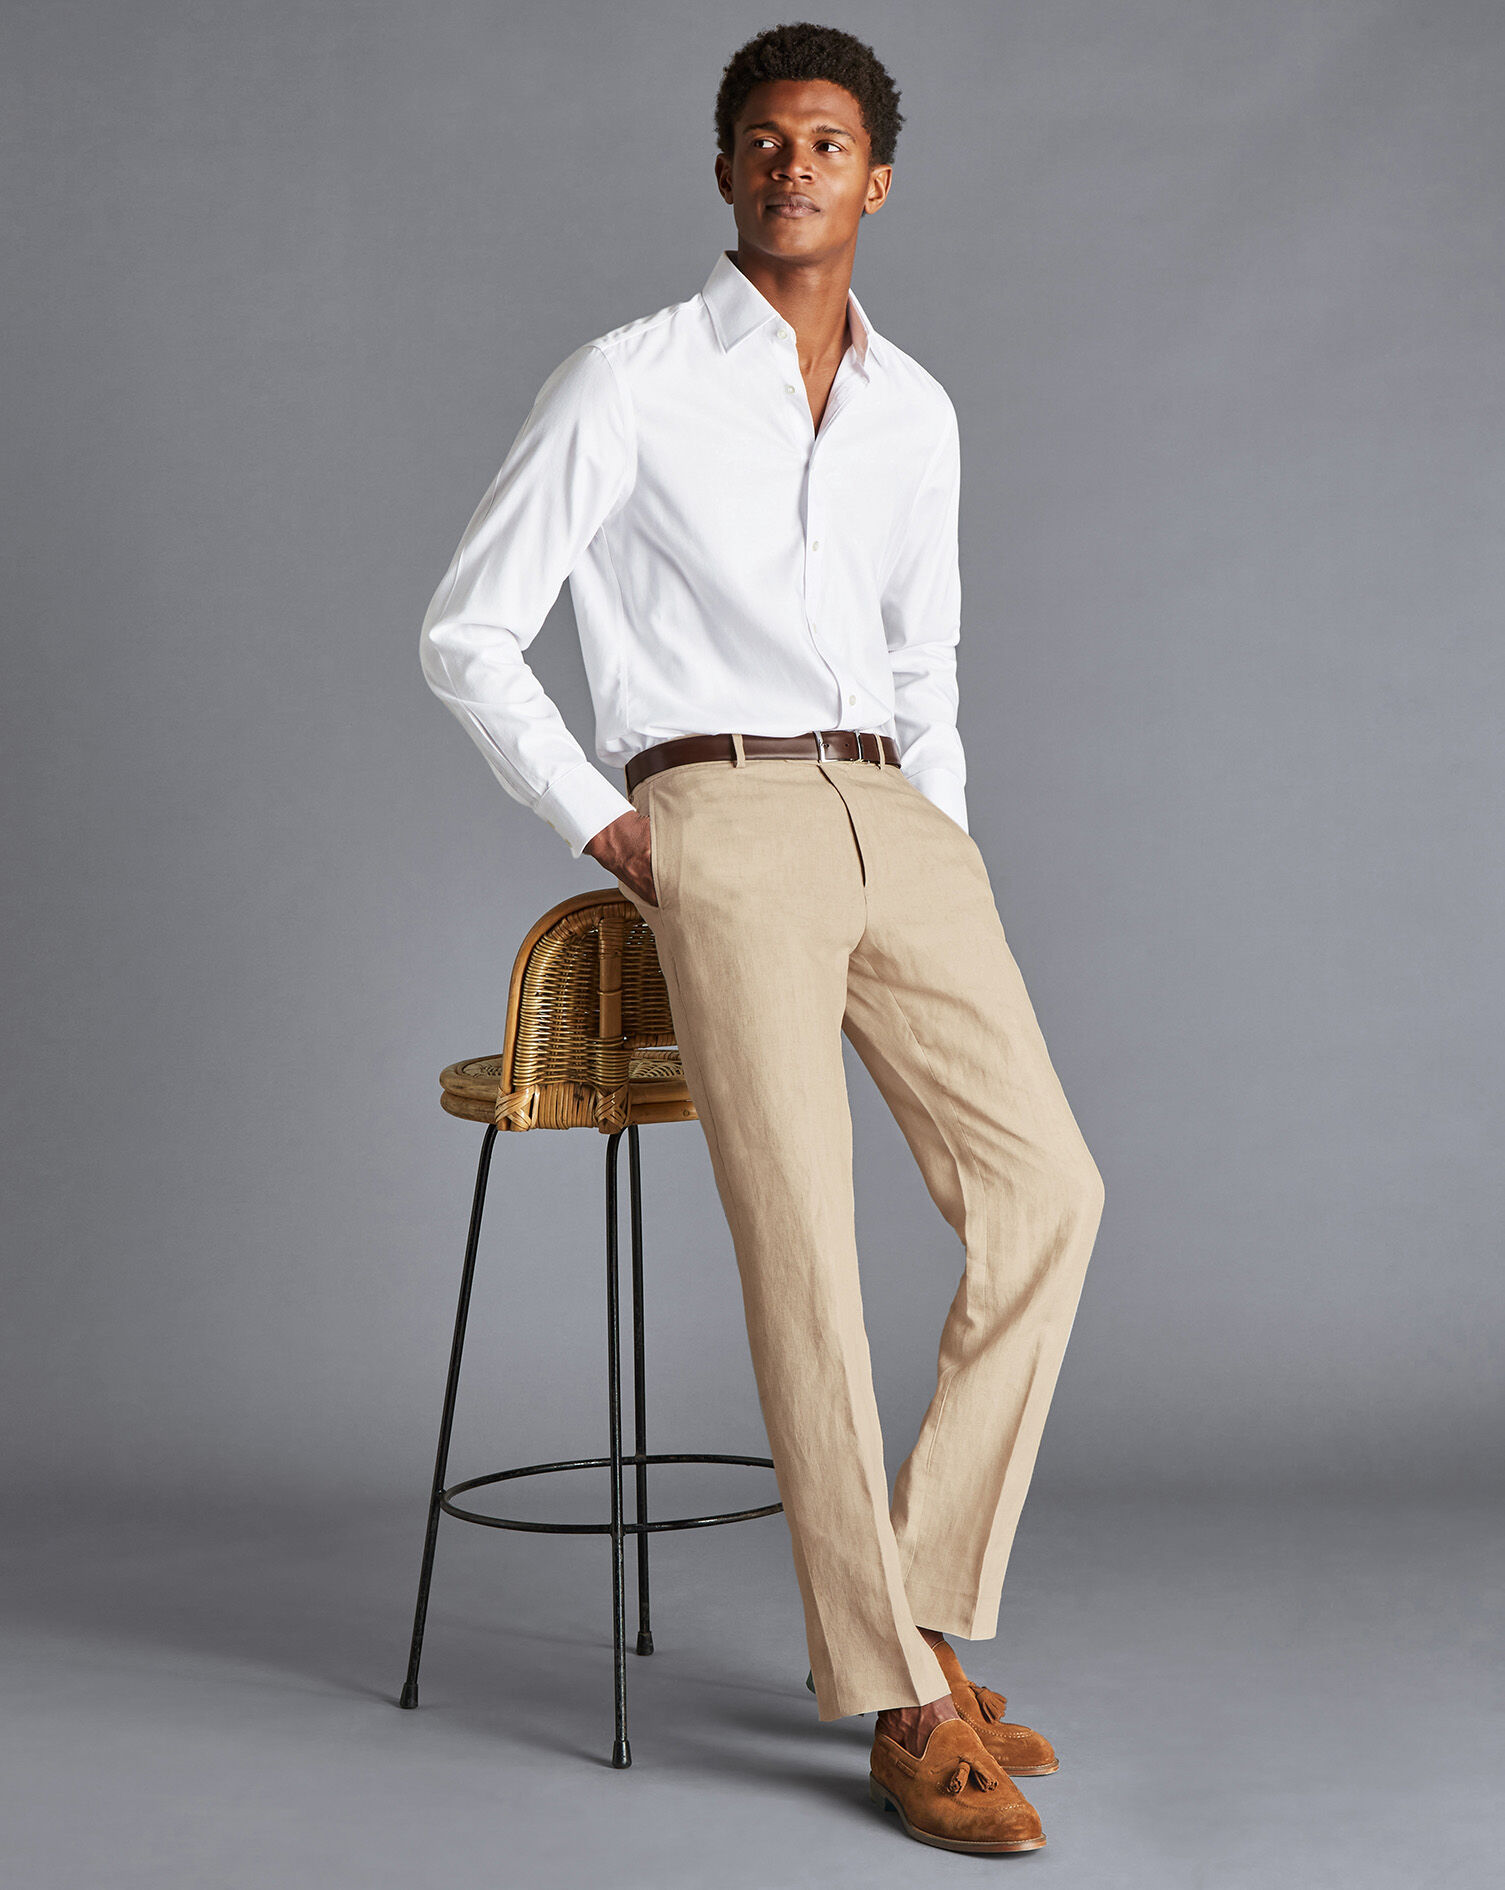 Beige linen trousers Soragna Capsule Collection  Made in Italy  Pini  Parma